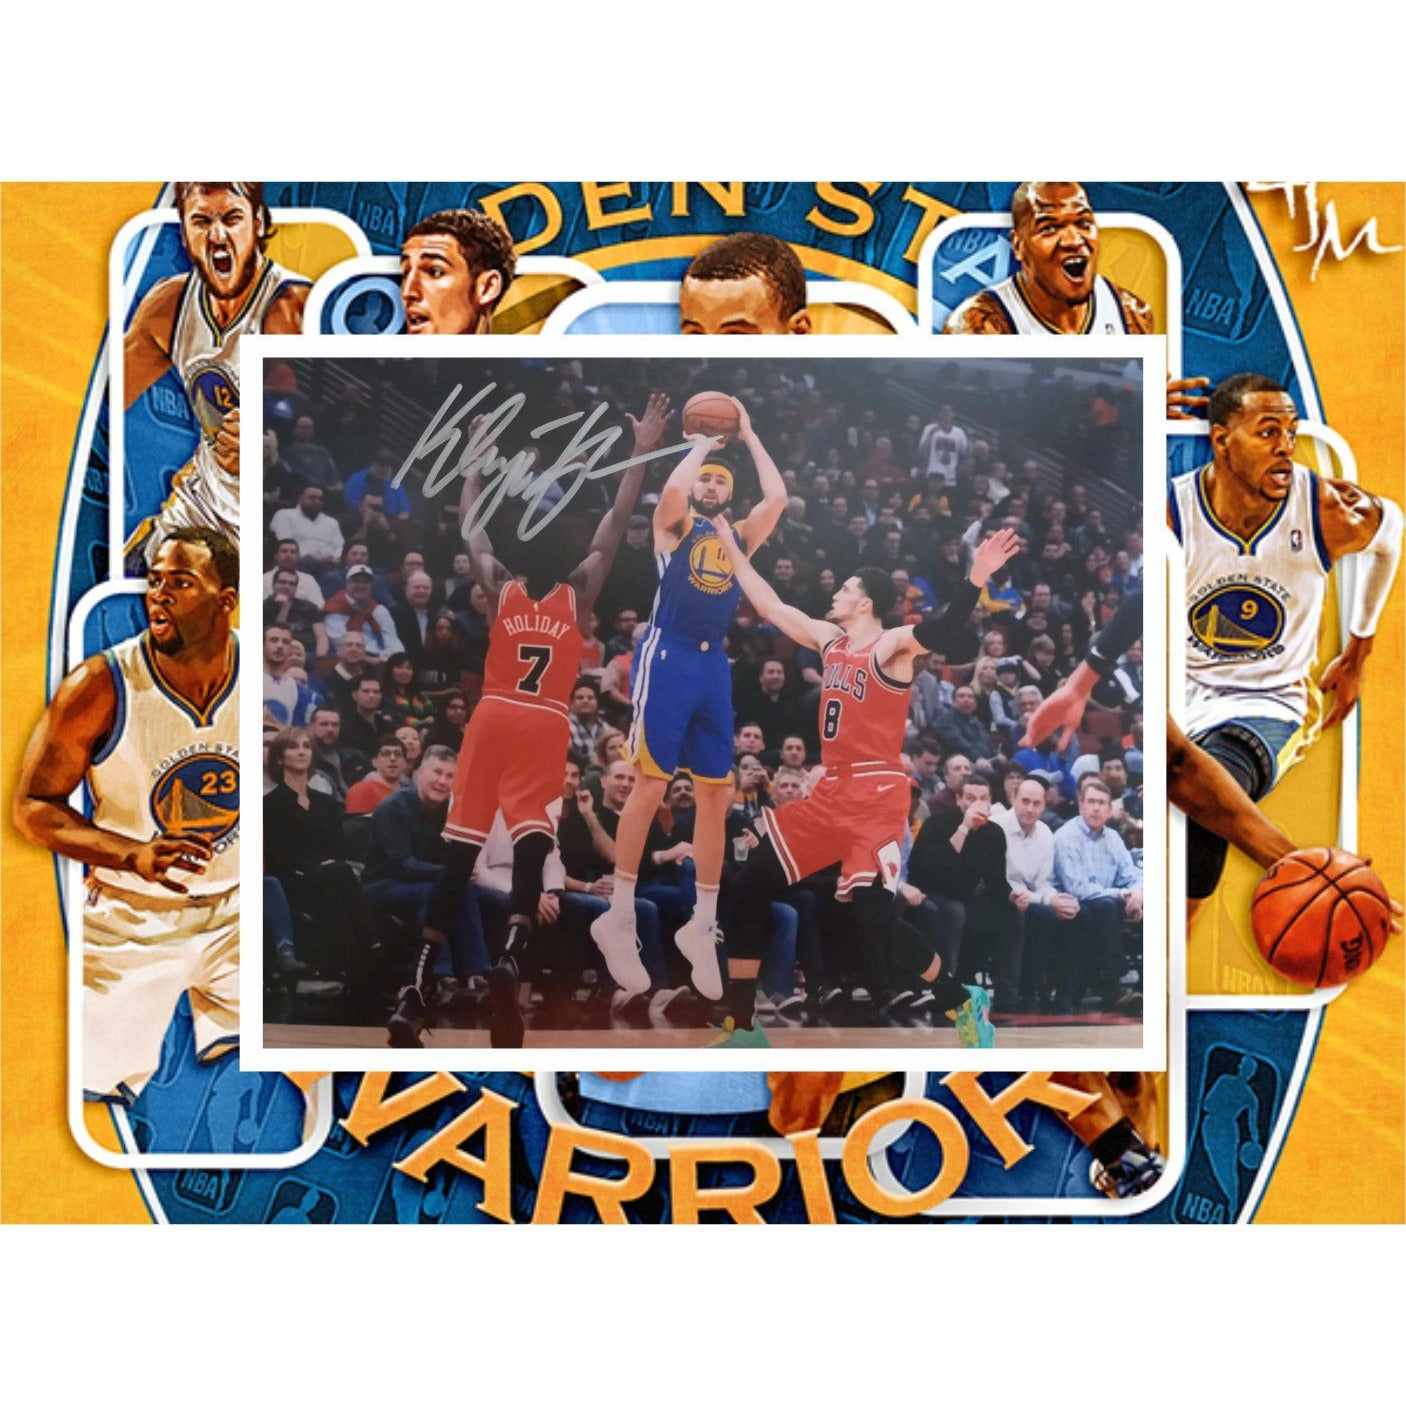 Klay Thompson 8x10 photo signed with proof